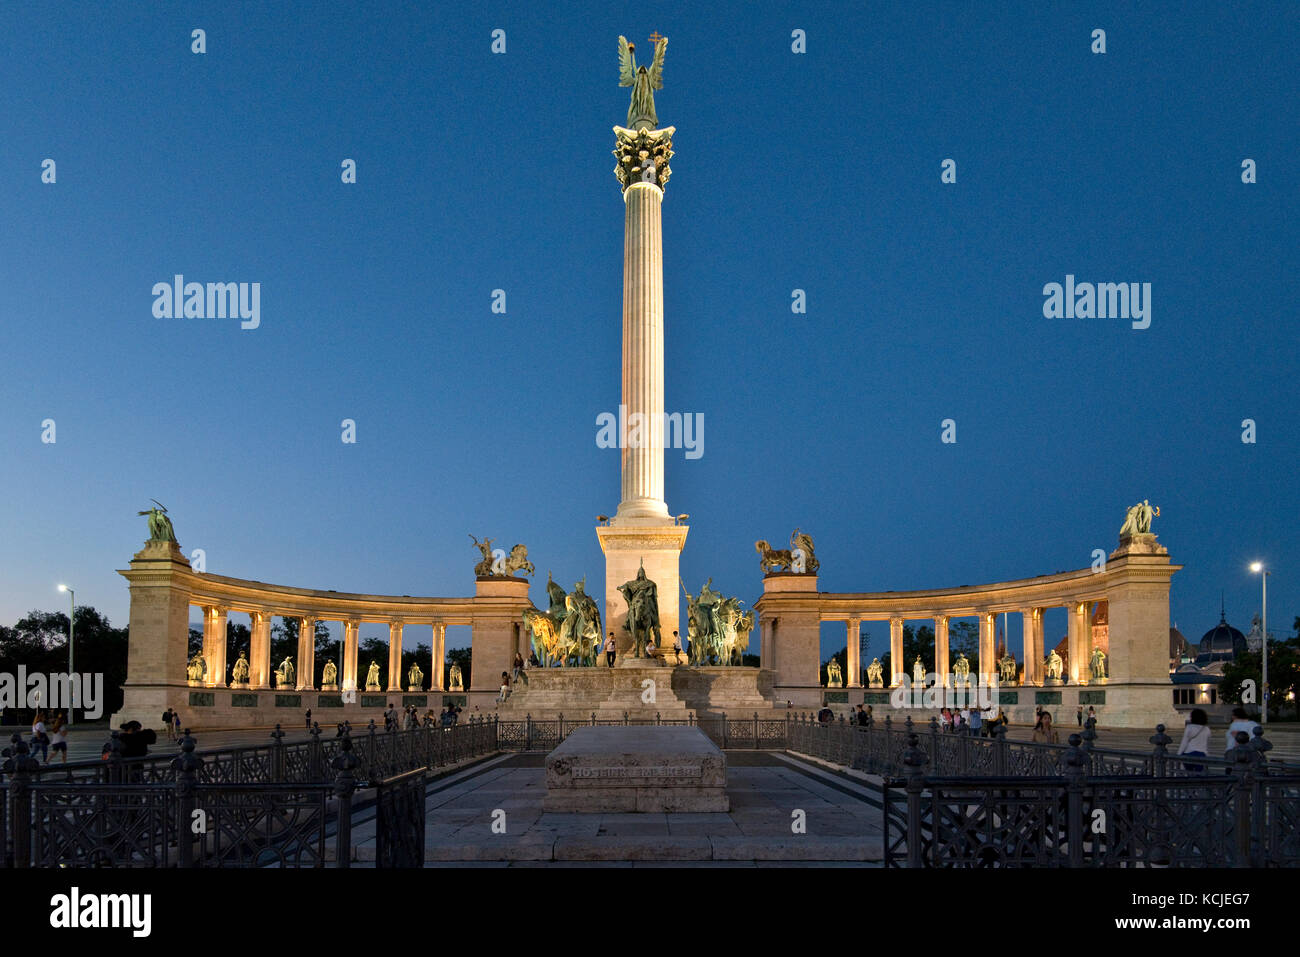 A view of Heroes' Square - Hősök tere - in Budapest at night evening dusk. Stock Photo